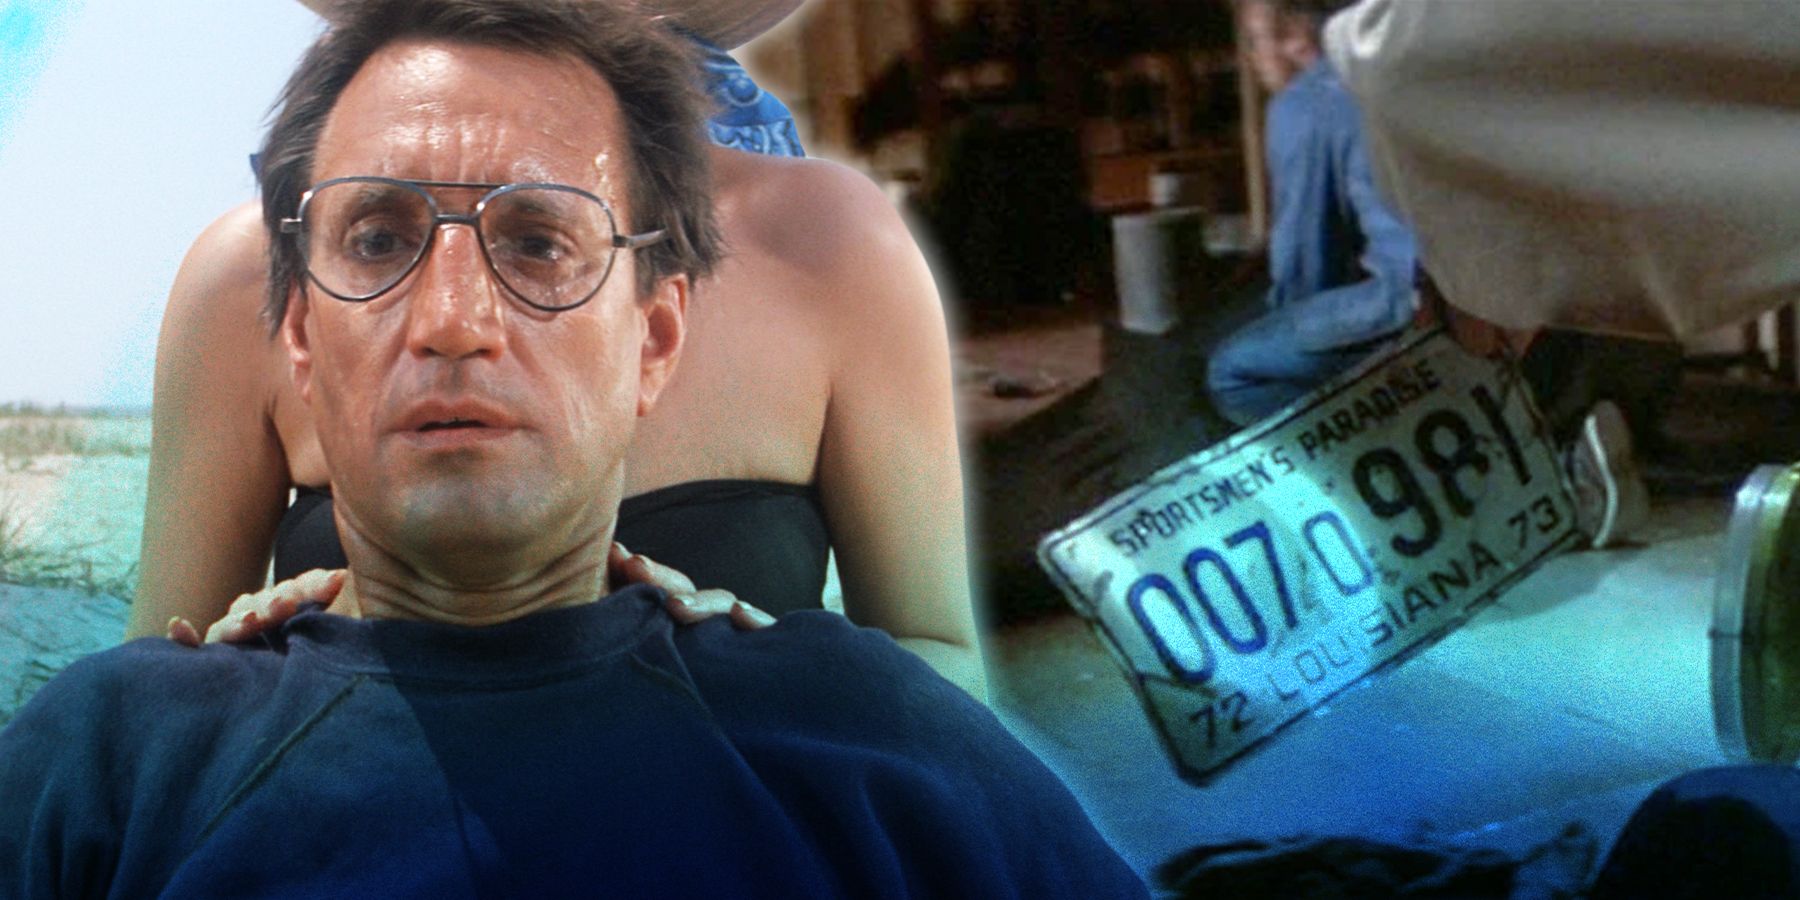 A Jaws Easter Egg Ties the Film's Universe to James Bond